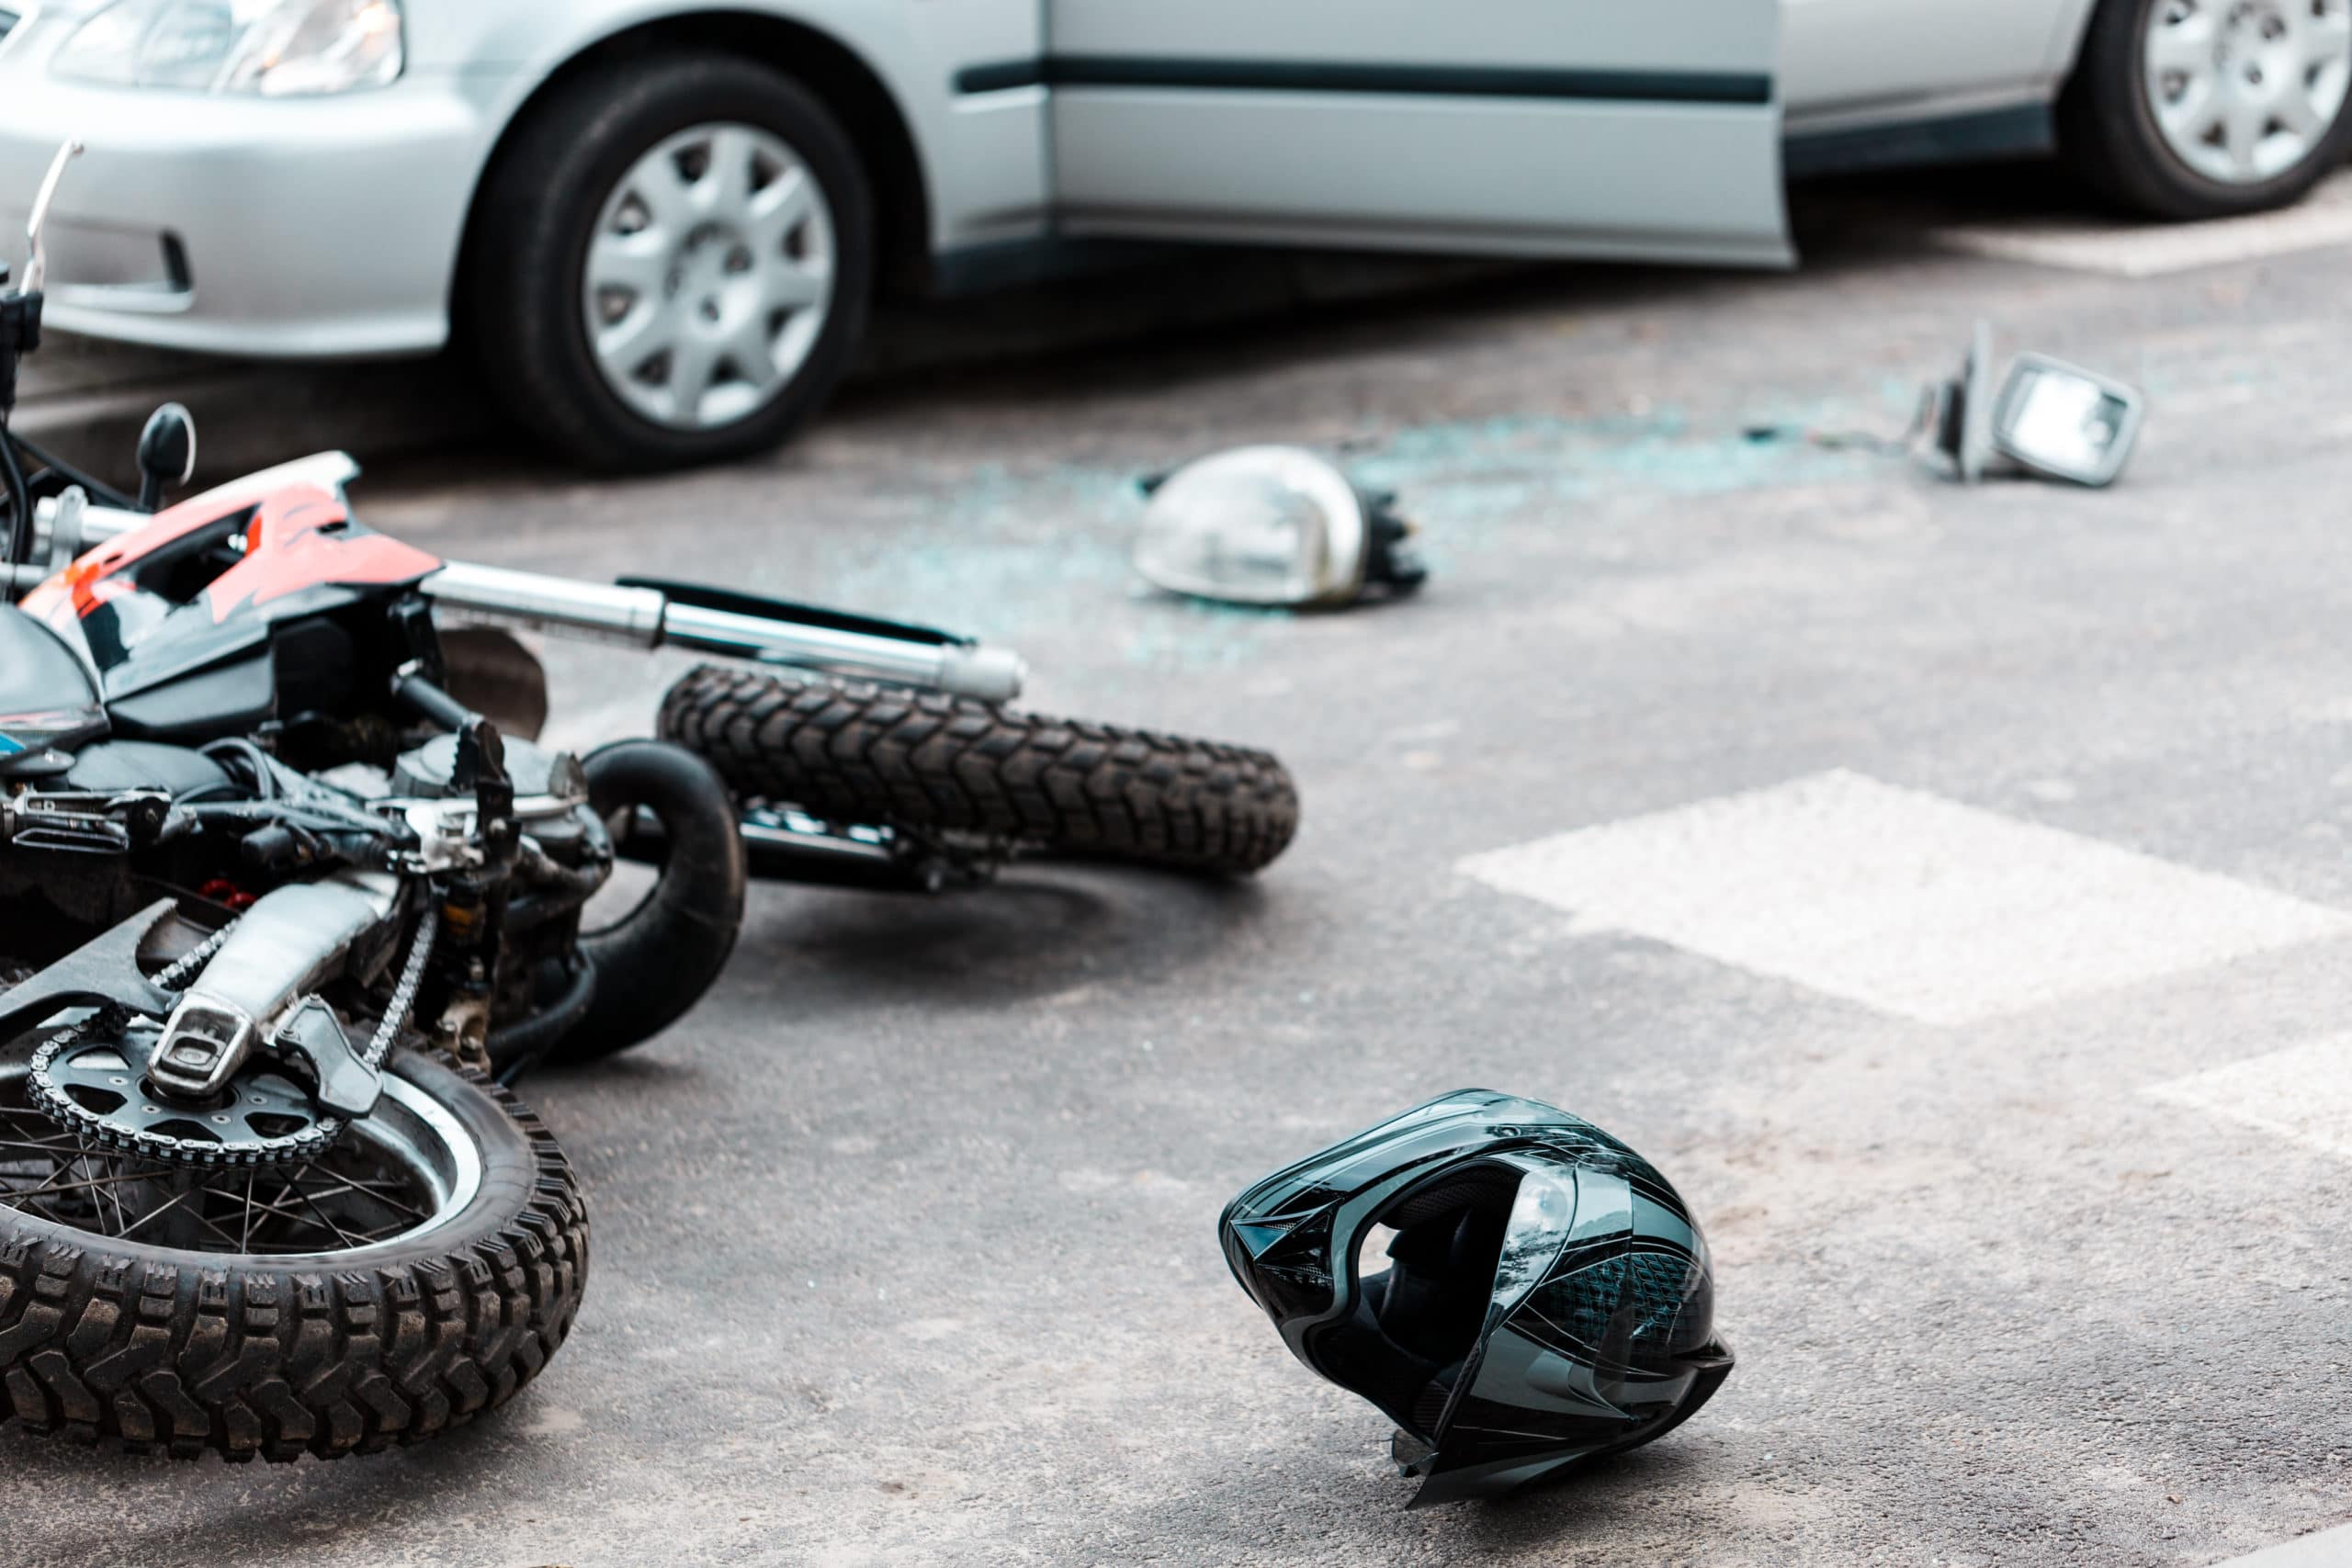 I’ve Been Hurt in a Motorcycle Accident in West Palm Beach, FL – Do I Need a Lawyer?